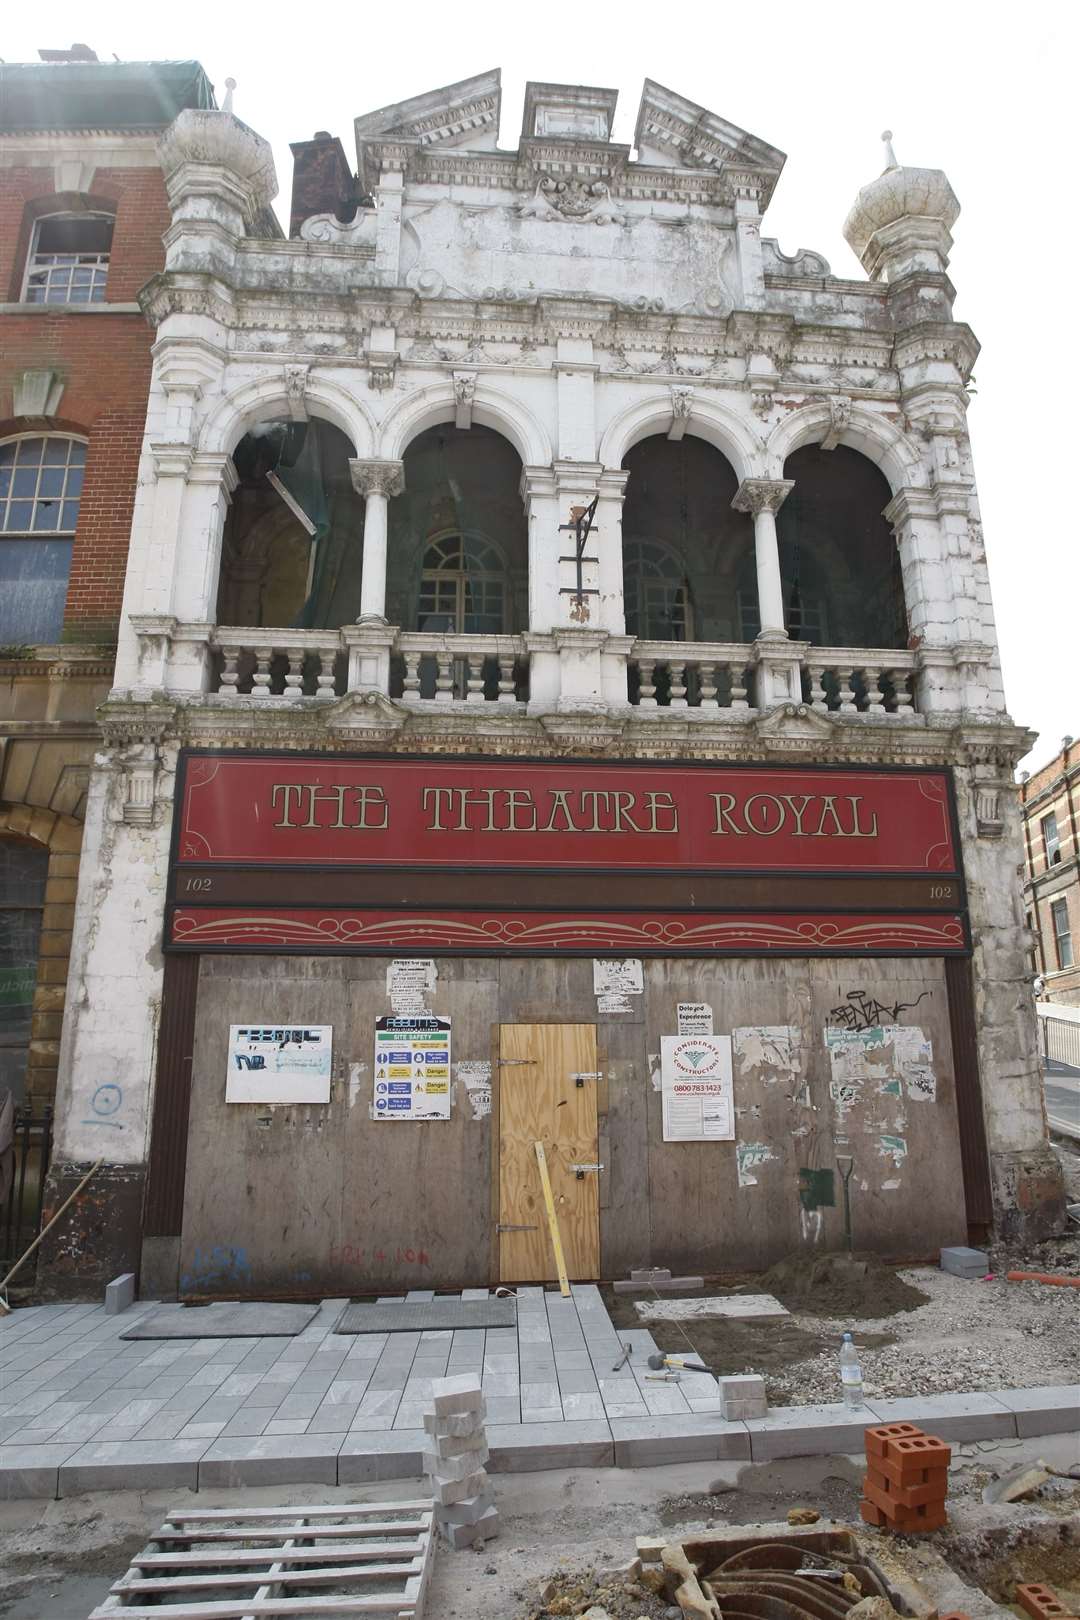 The scale of the transformation of the theatre is shown by the sheer scale of degradation and neglect the building had suffered for almost 30 years